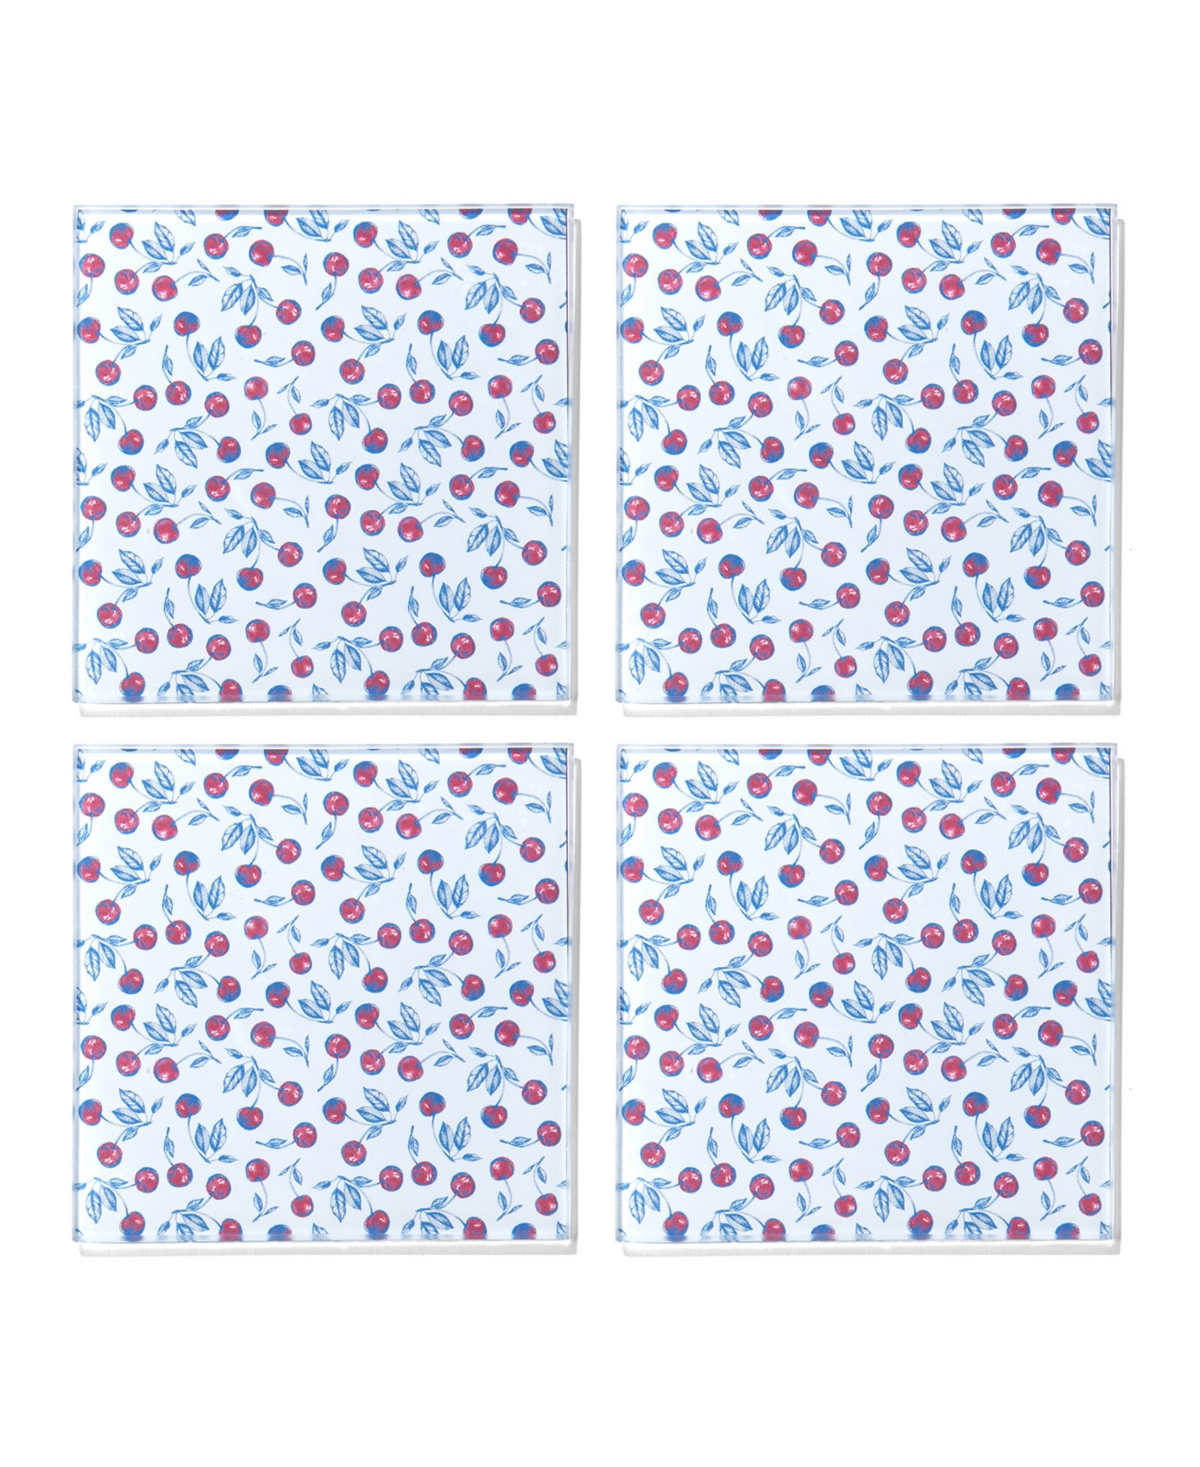 American Atelier 4 X 4" Cherries Galore Glass Coasters Set, 4 Piece In Blue